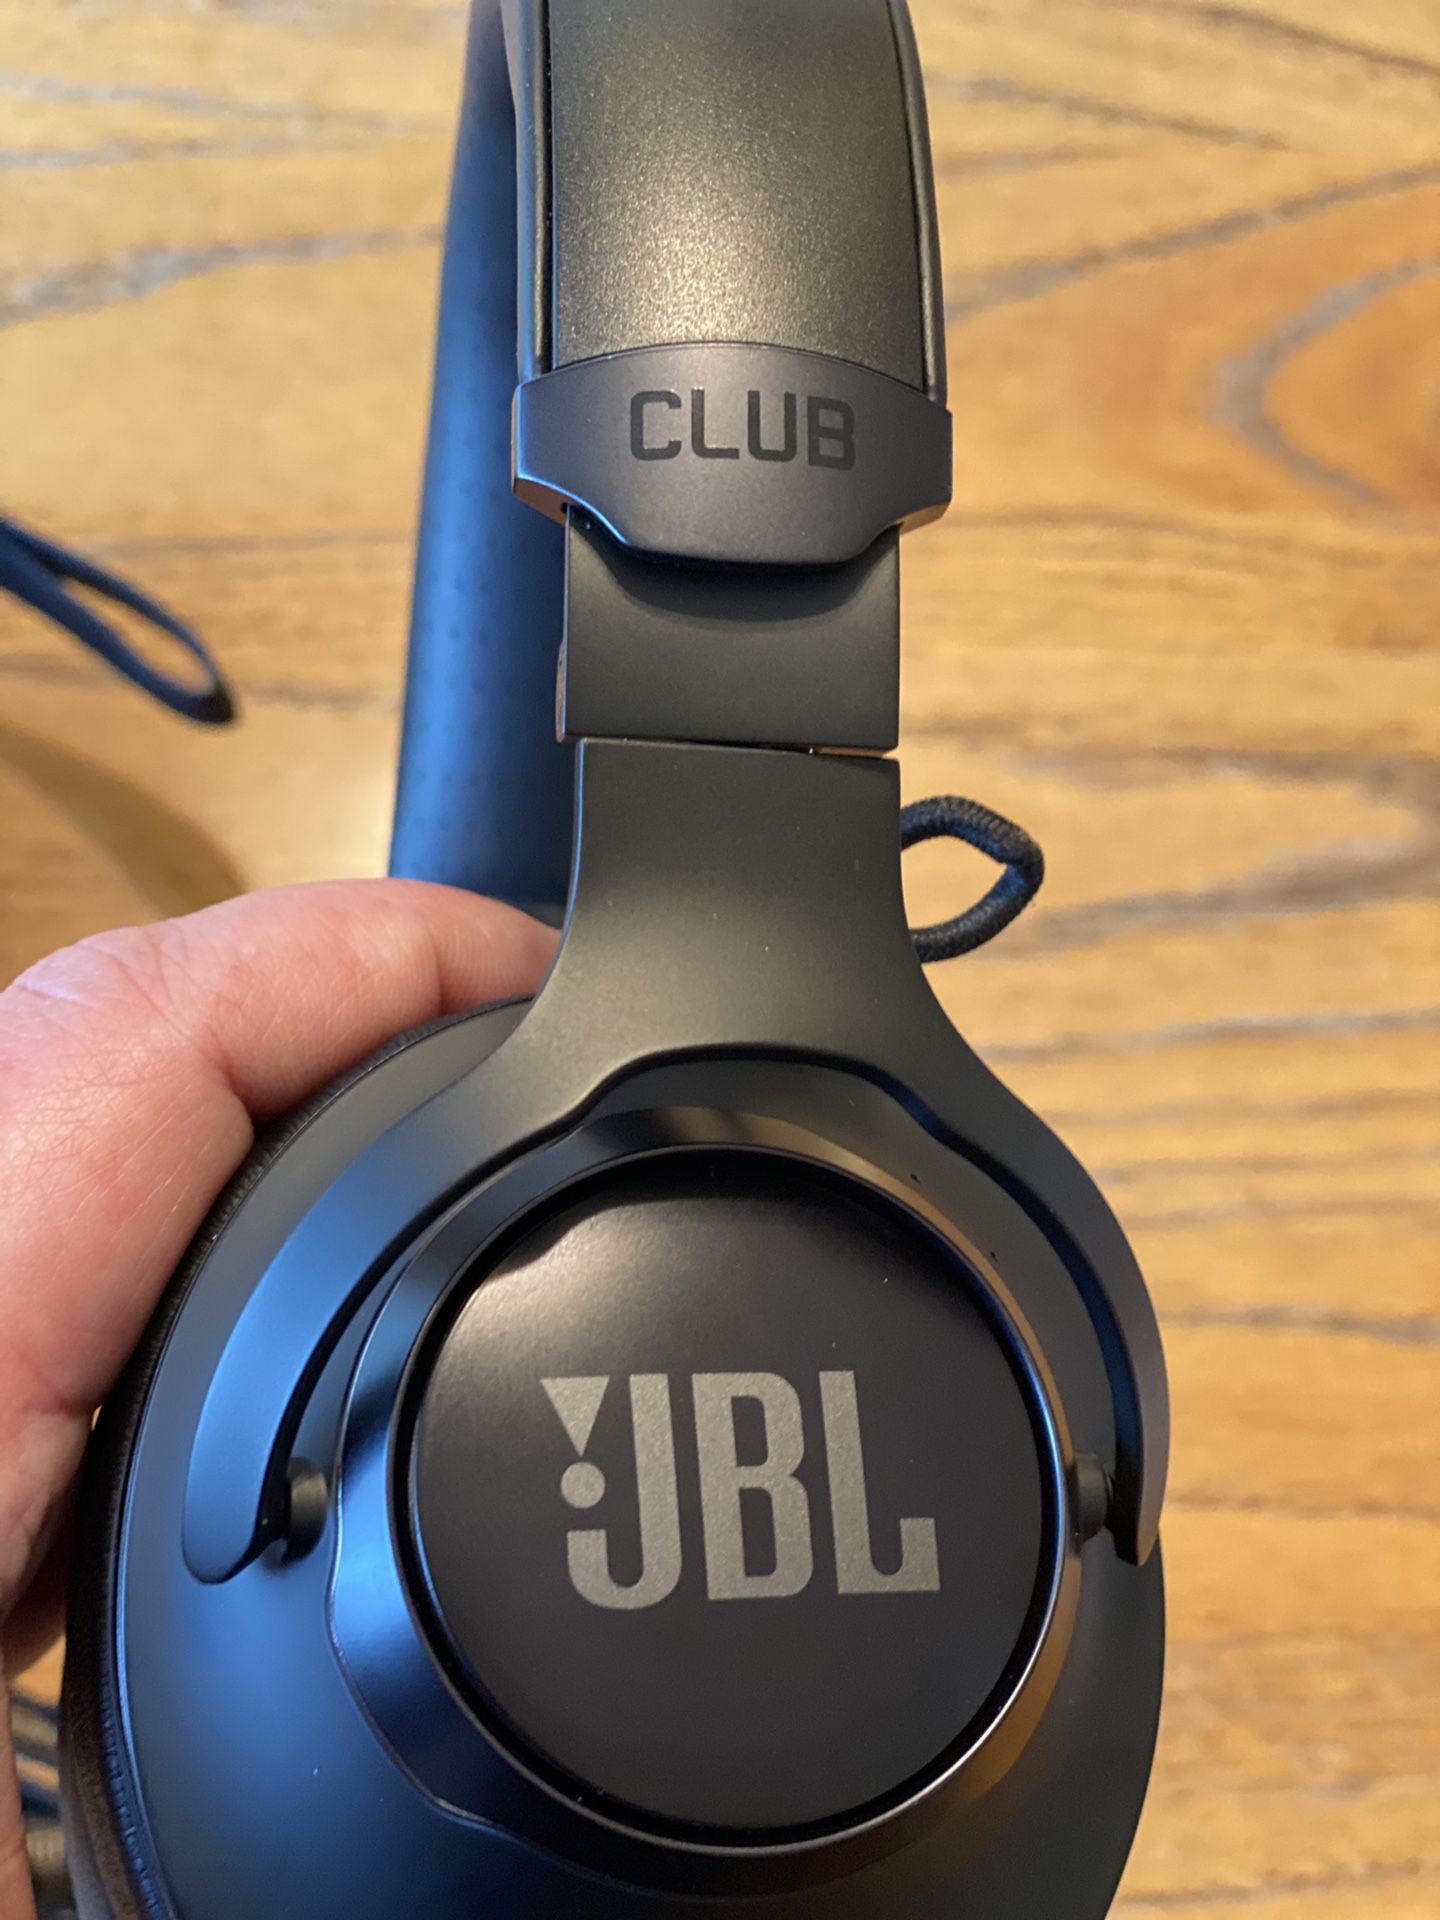 JBL - Club 950NC Wireless Noise Cancelling Over-the-Ear Headphones - Black